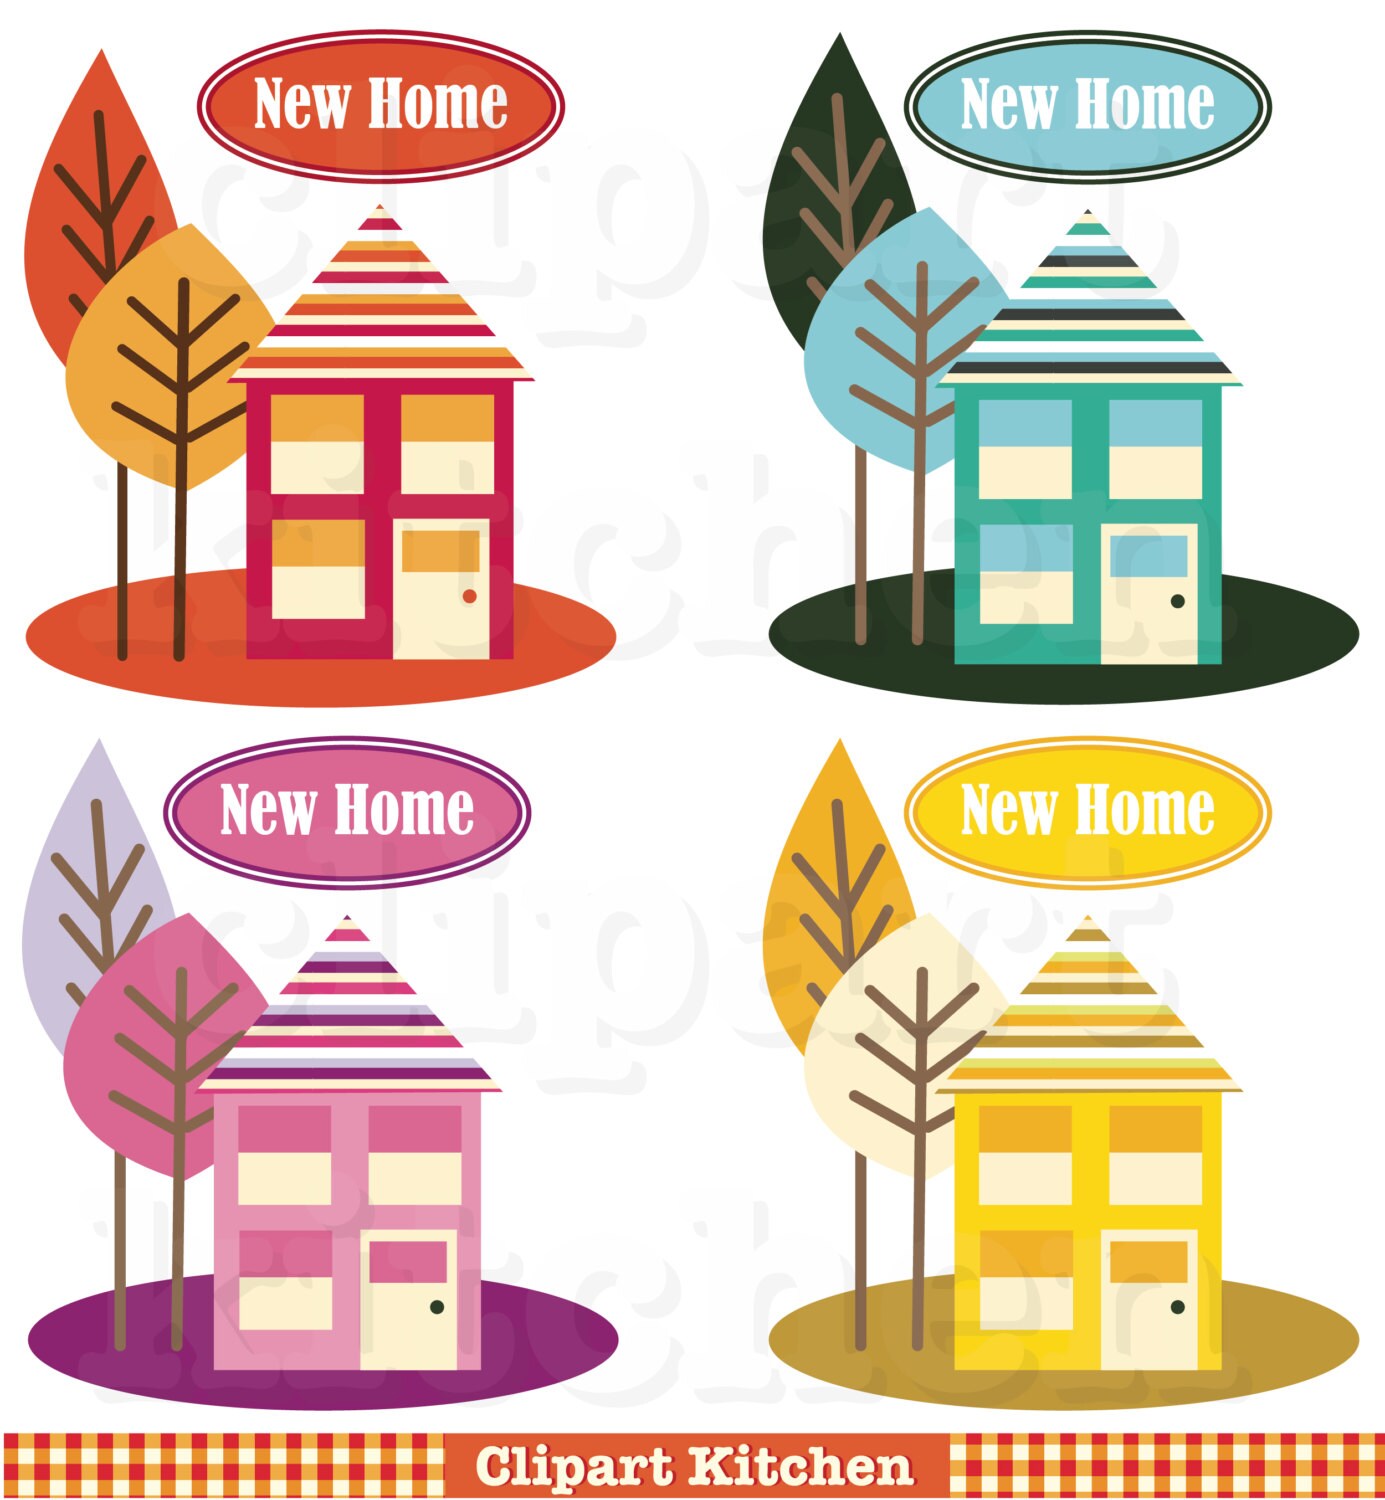 new house clipart - photo #48